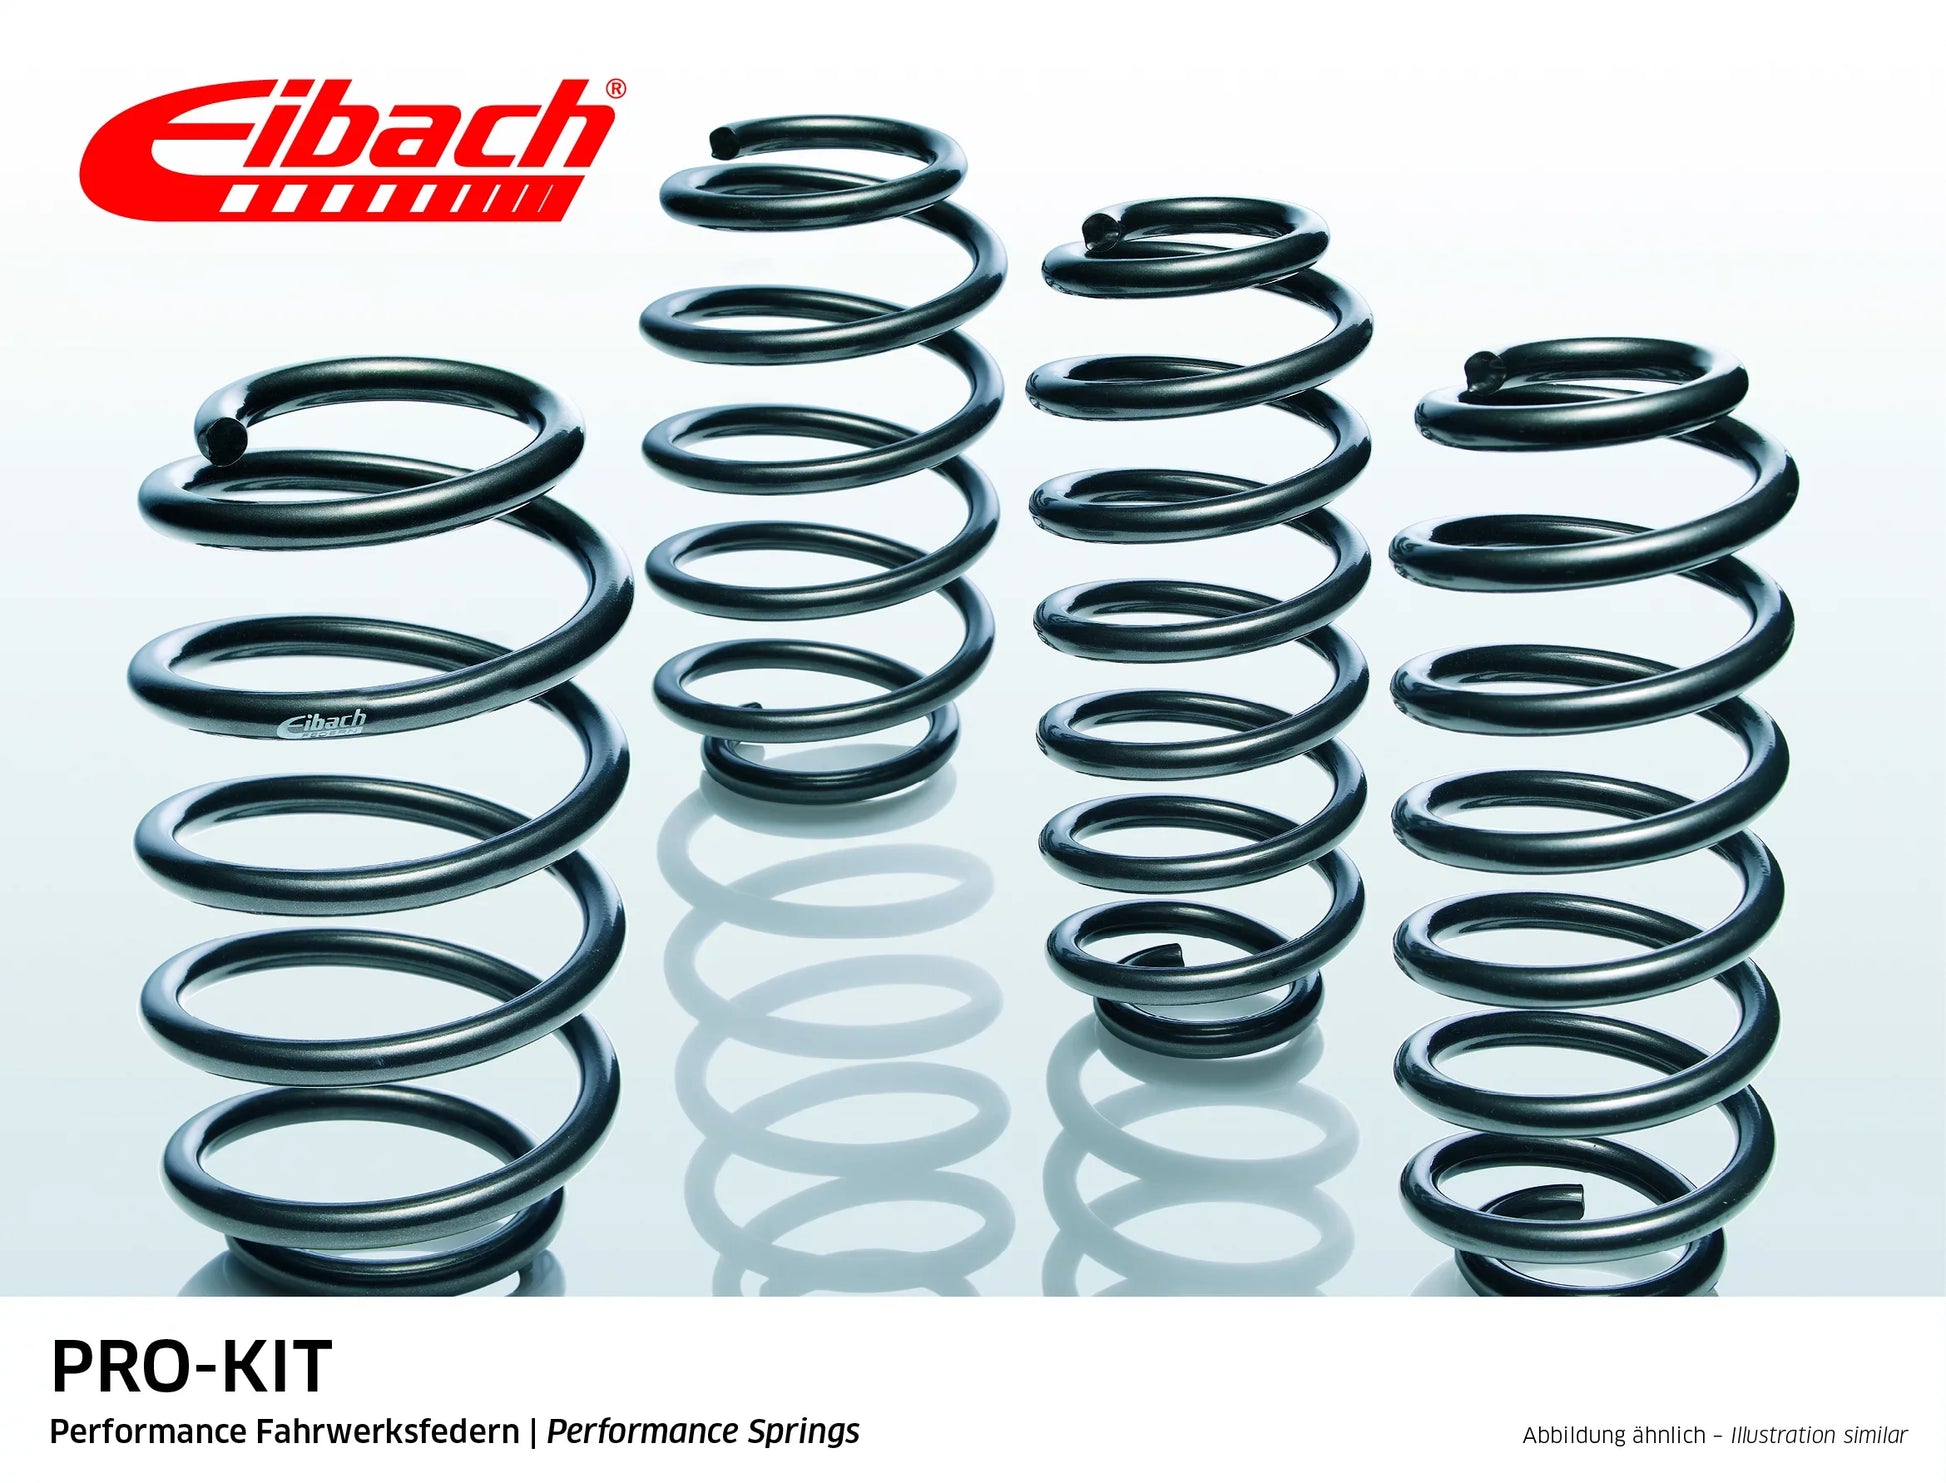 Eibach Pro-Kit Lowering Springs (E10-15-023-03-22) at £283.00